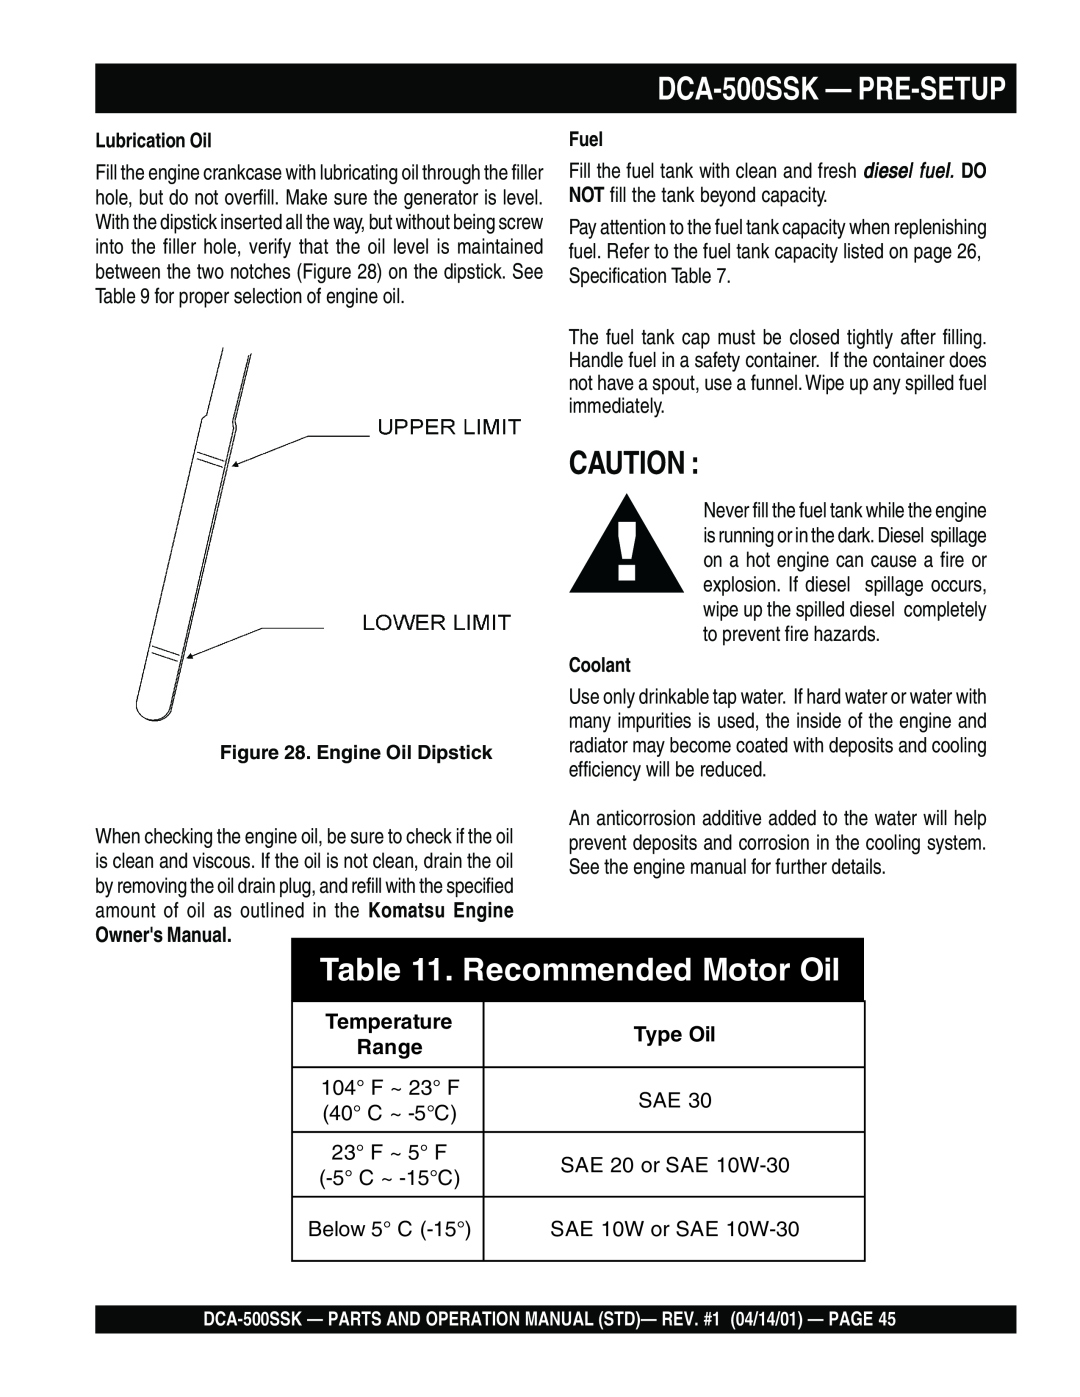 Multiquip operation manual Recommended Motor Oil, Owners Manual, Type Oil, Range, DCA-500SSK - PRE-SETUP 